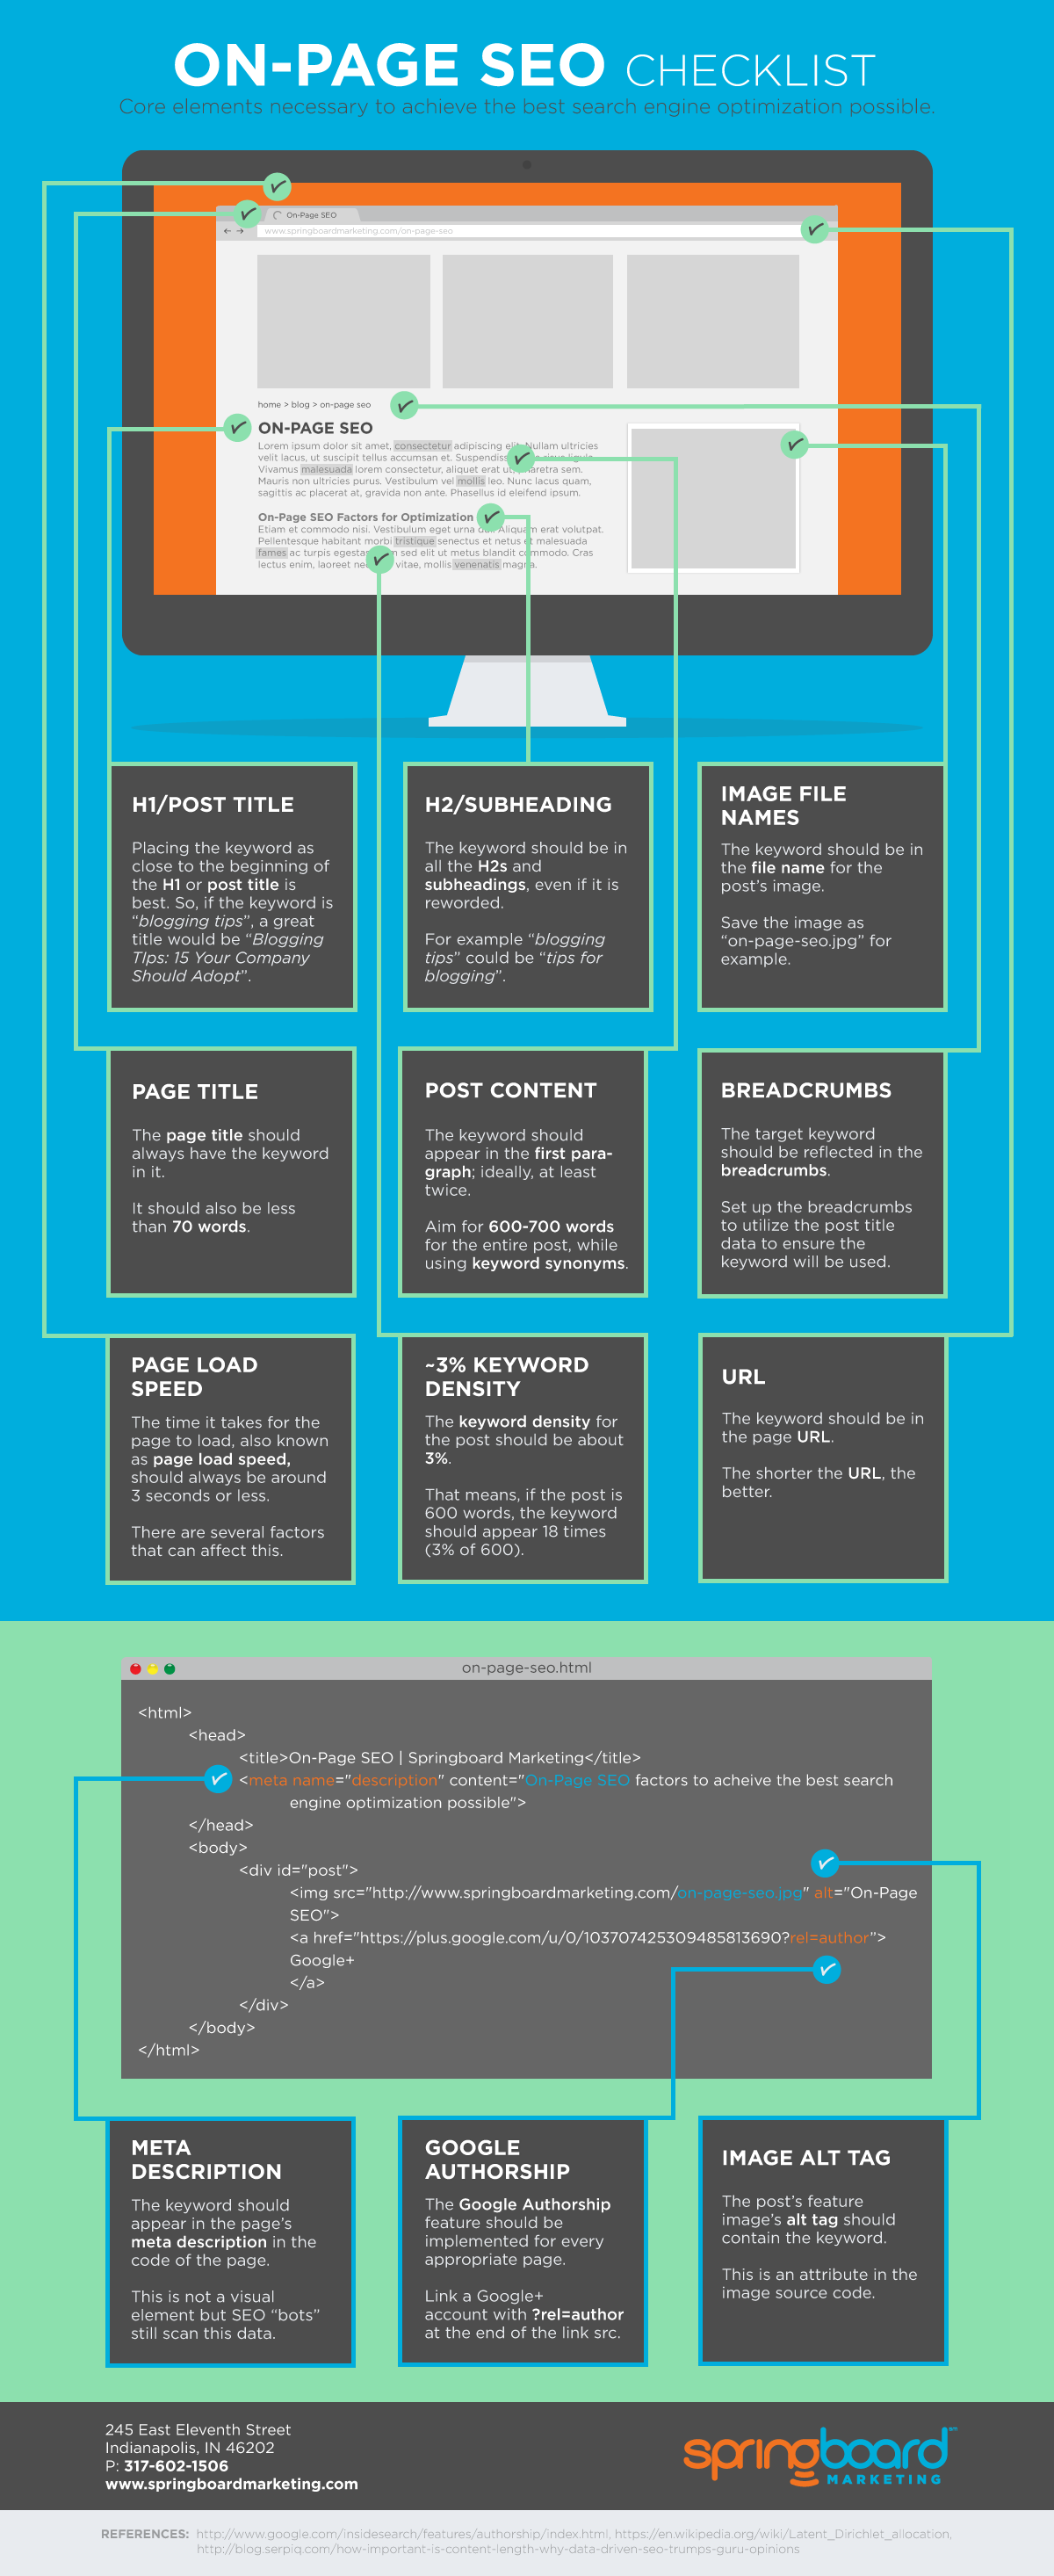 On-page SEO Checklist - #Infographic